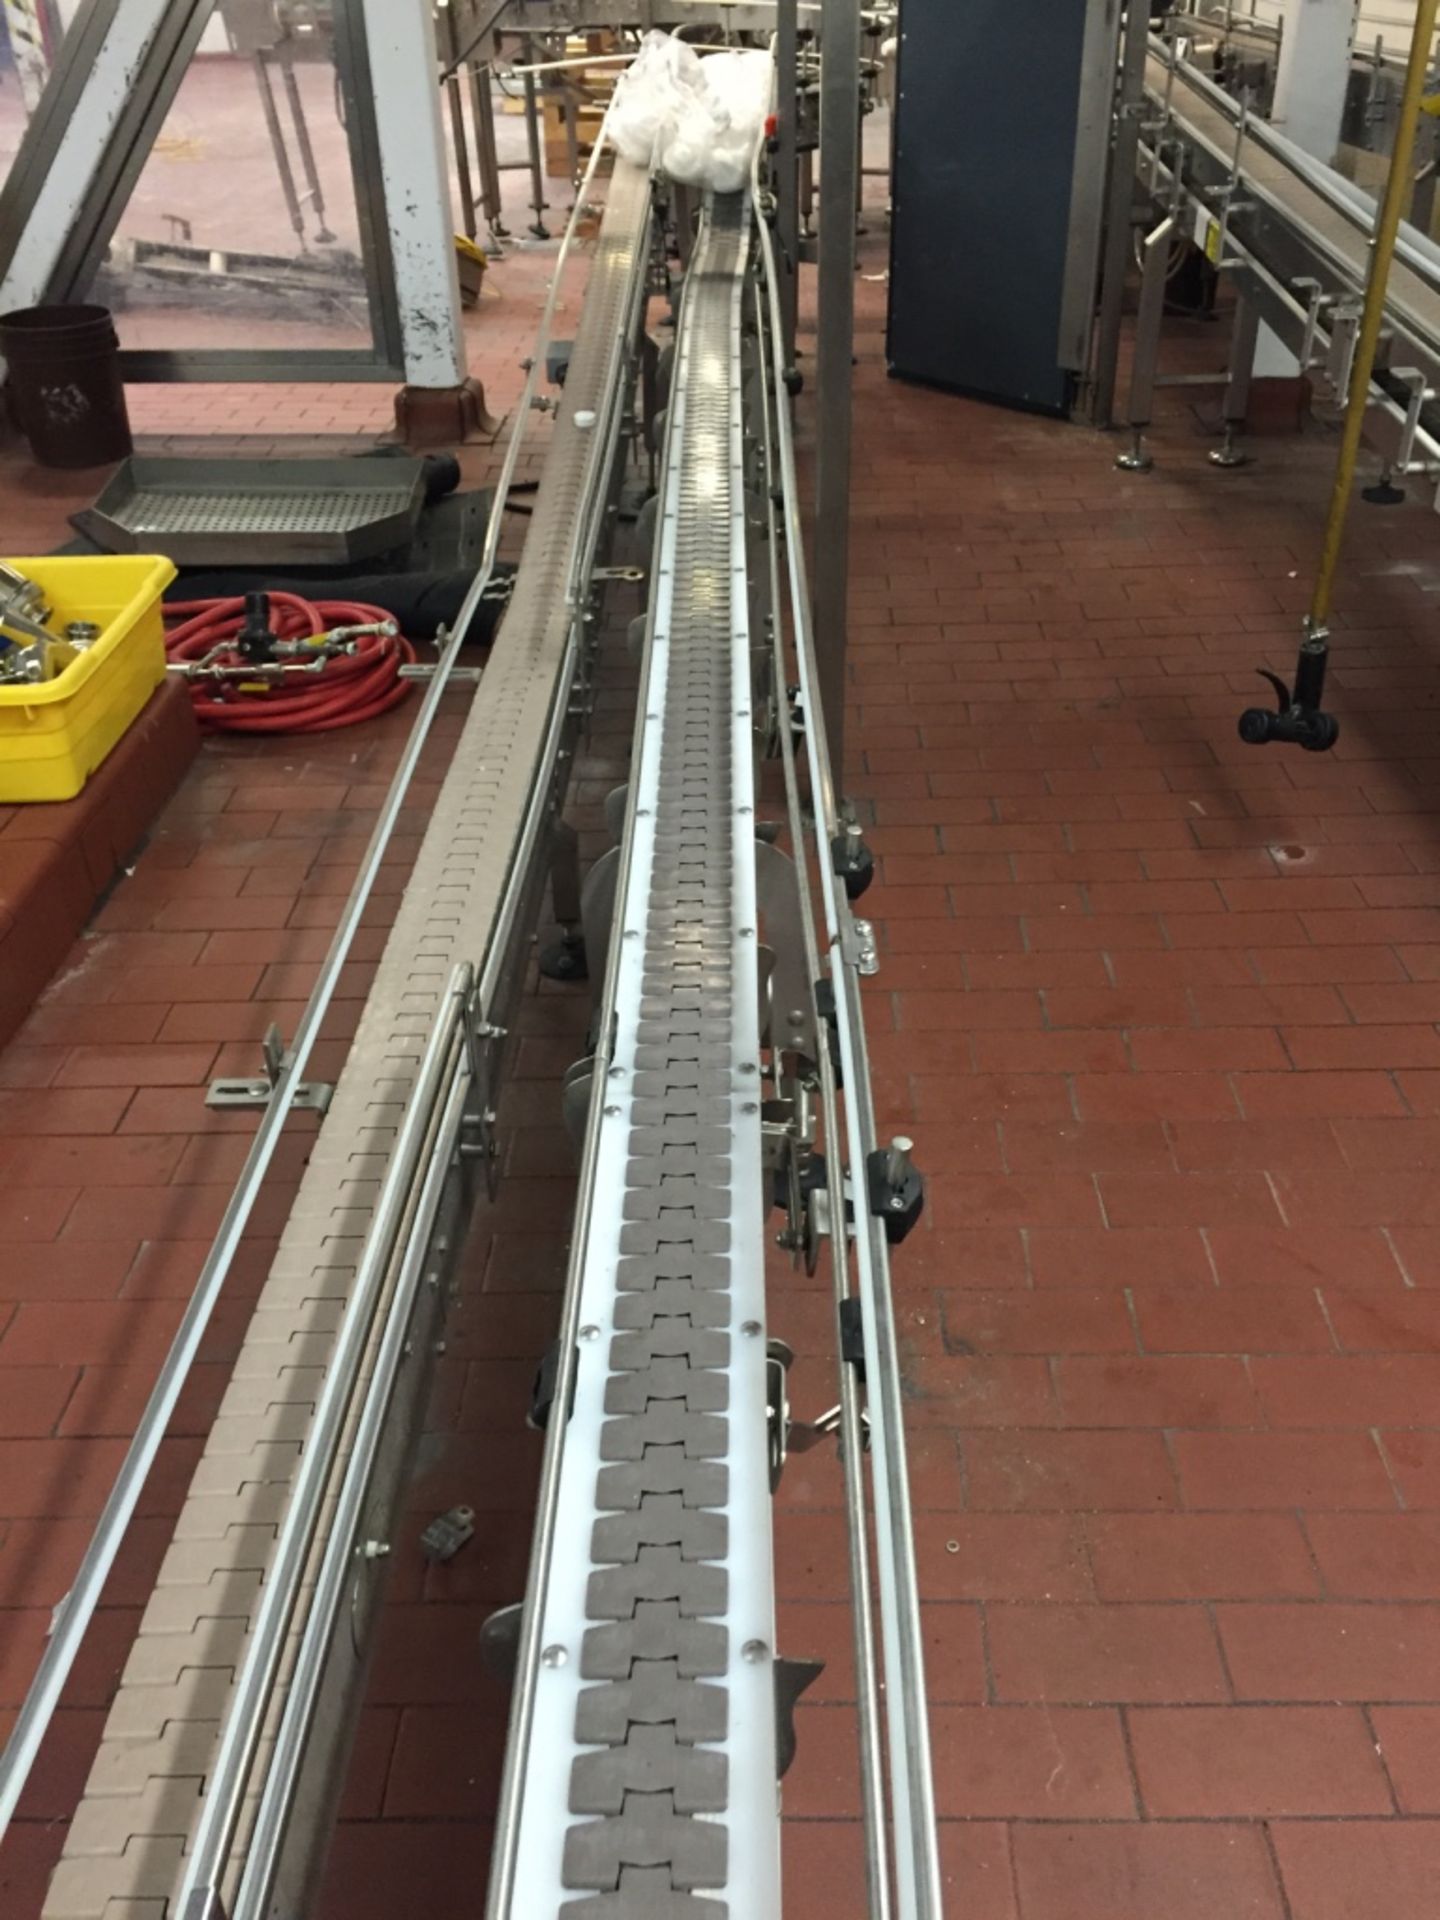 Stainless Curve Conveyor 3" x Approximate 50 feet return - Rigging Fee $300, If Crating or Lumbe - Image 5 of 5